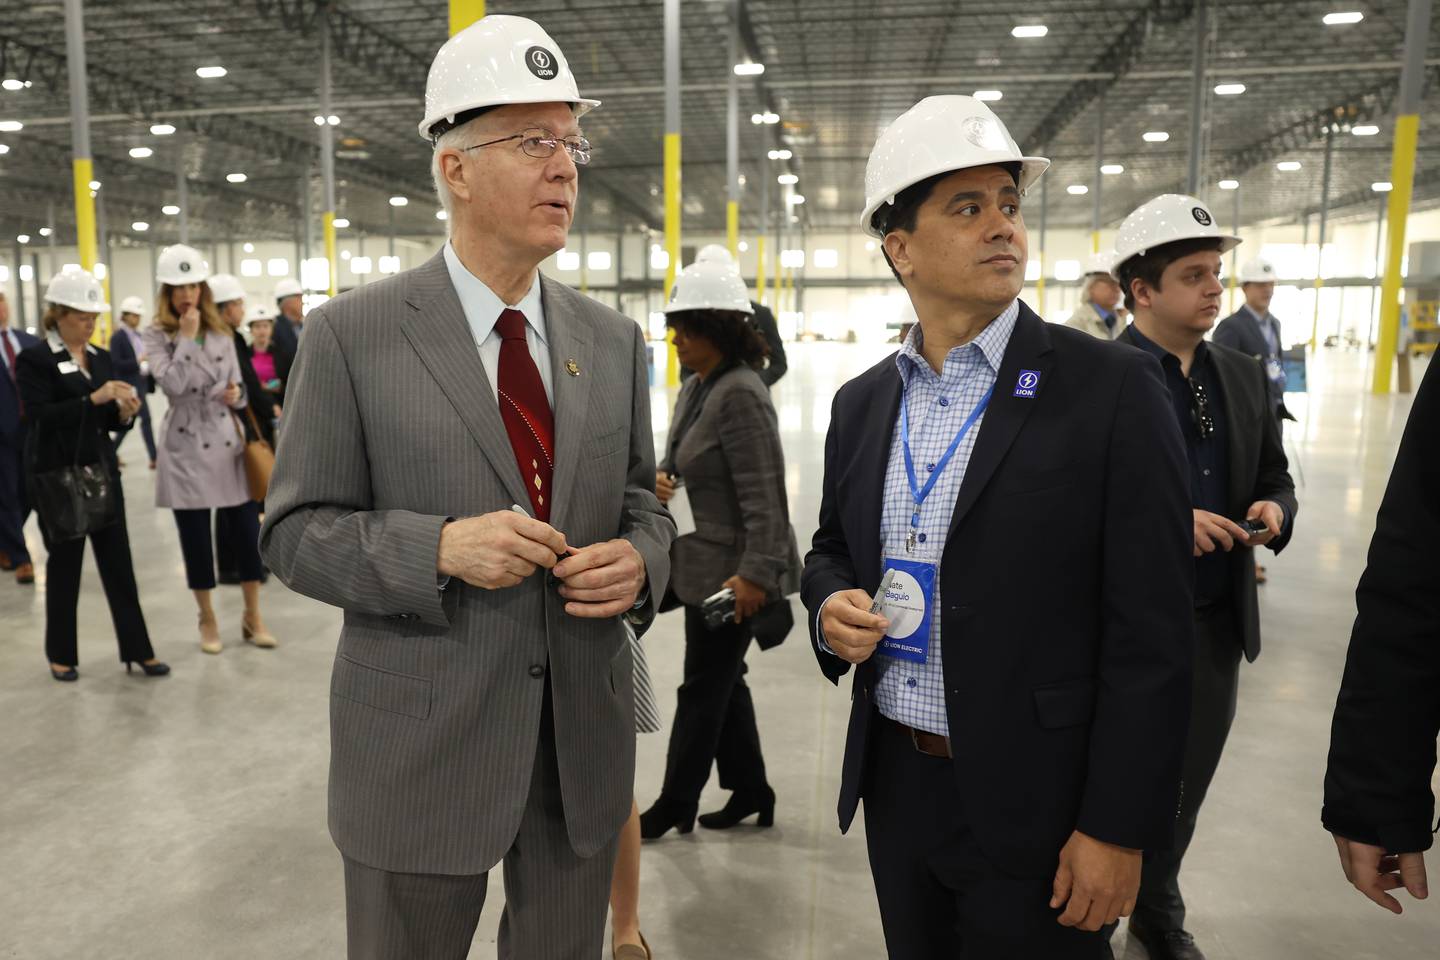 Congressman Bill Foster, left, speaks with Nate Baguio, Senior Vice President of Commercial Development for Lion Electric, during a press conference and interactive tour of the Lion Electric vehicle manufacturing facility. Monday, Mar. 21, 2022, in Joliet.